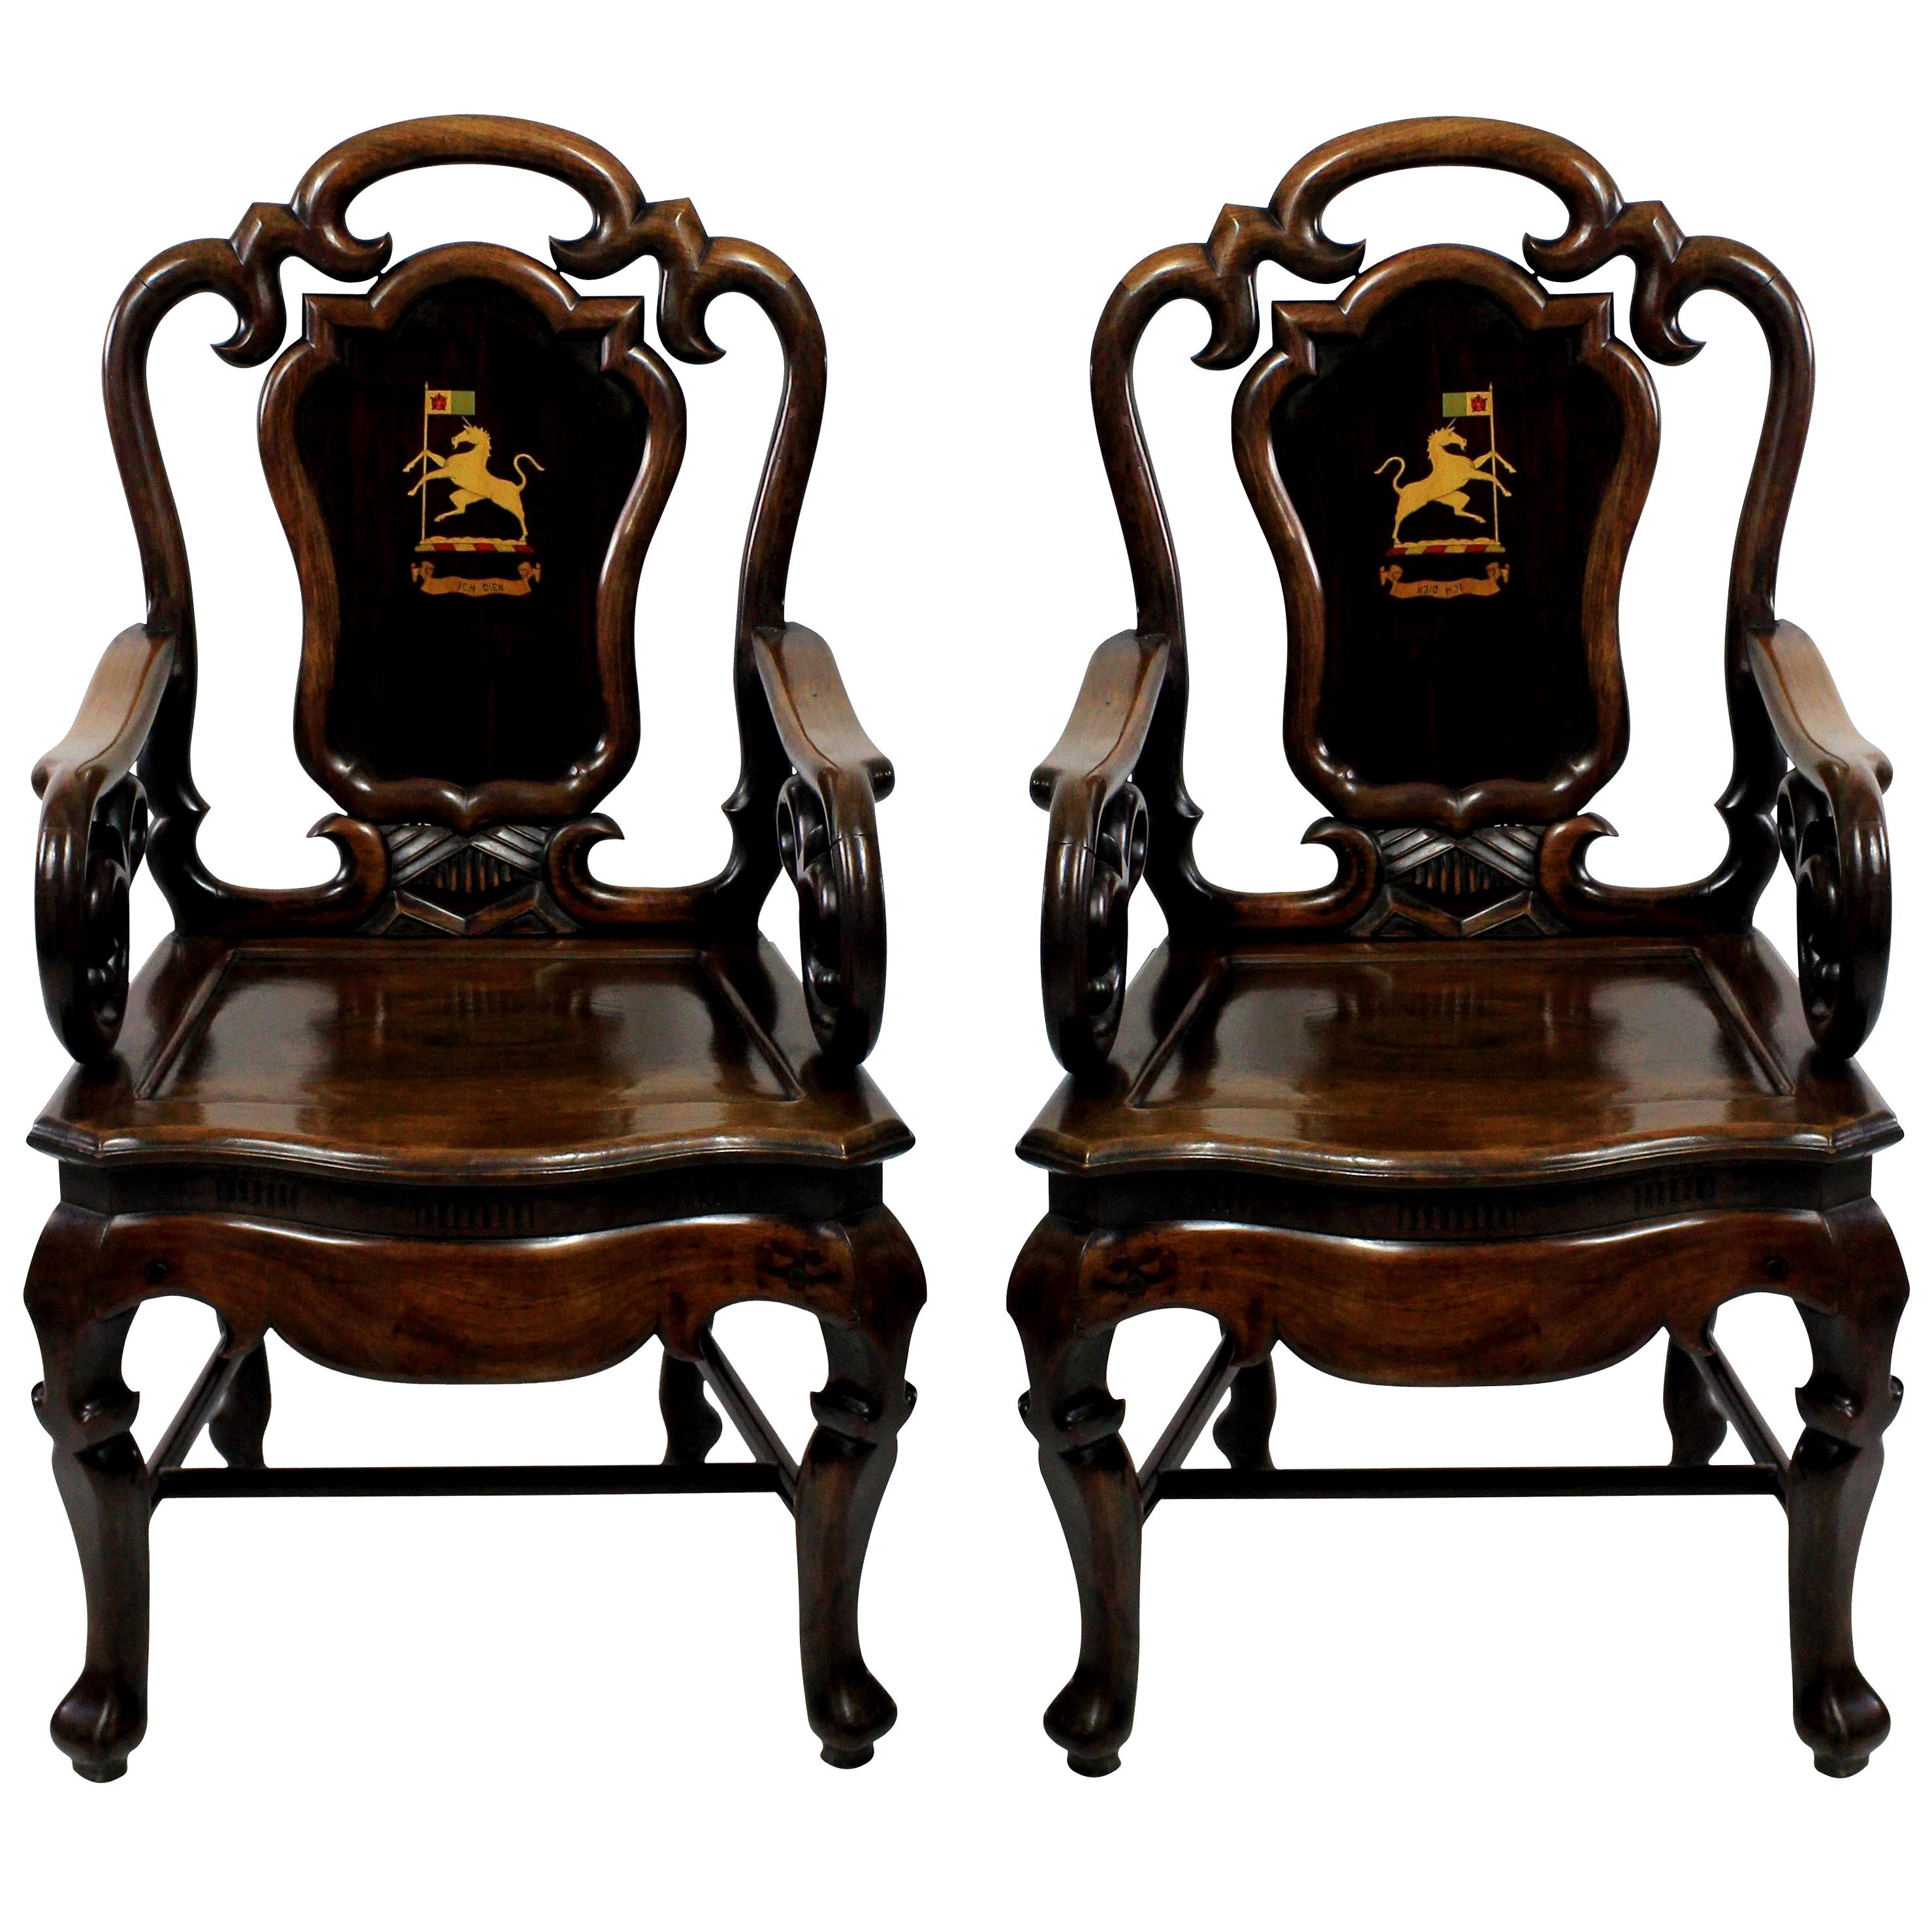 Beautiful Pair of Early 19th Century Anglo-Chinese Armchairs